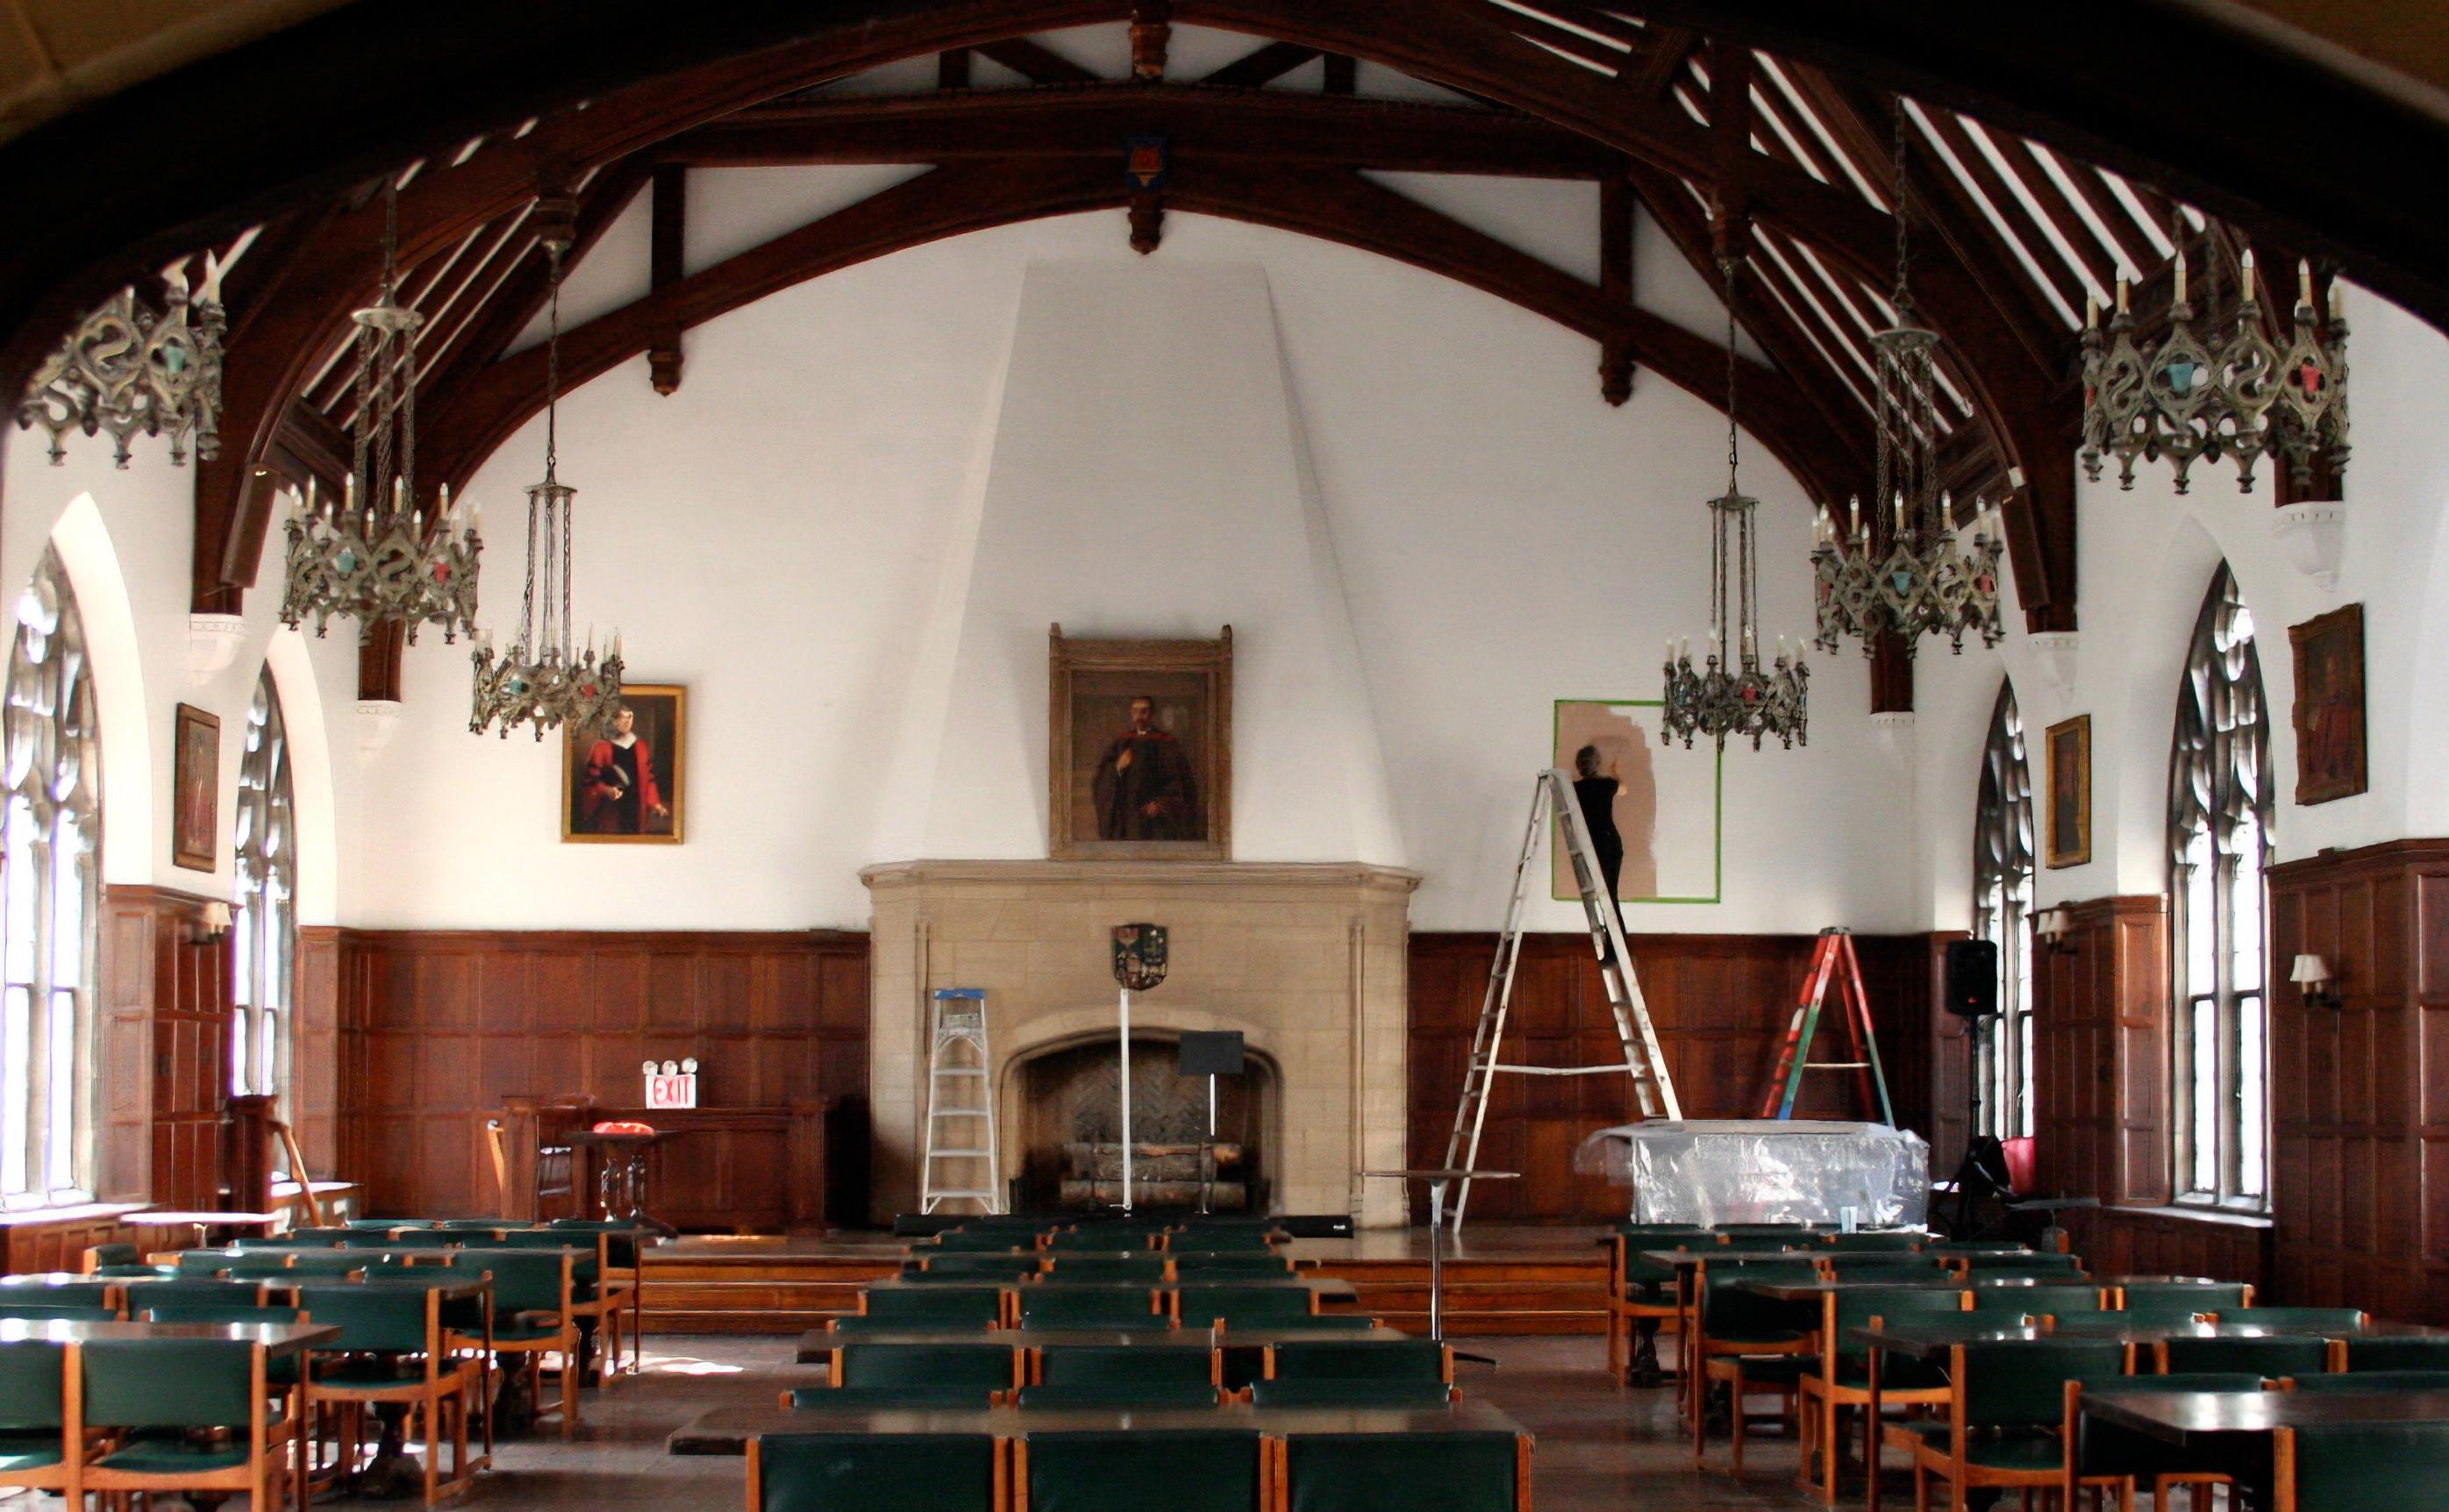 Installing About Face, Refectory, Union Theological Seminary, New York, 2012